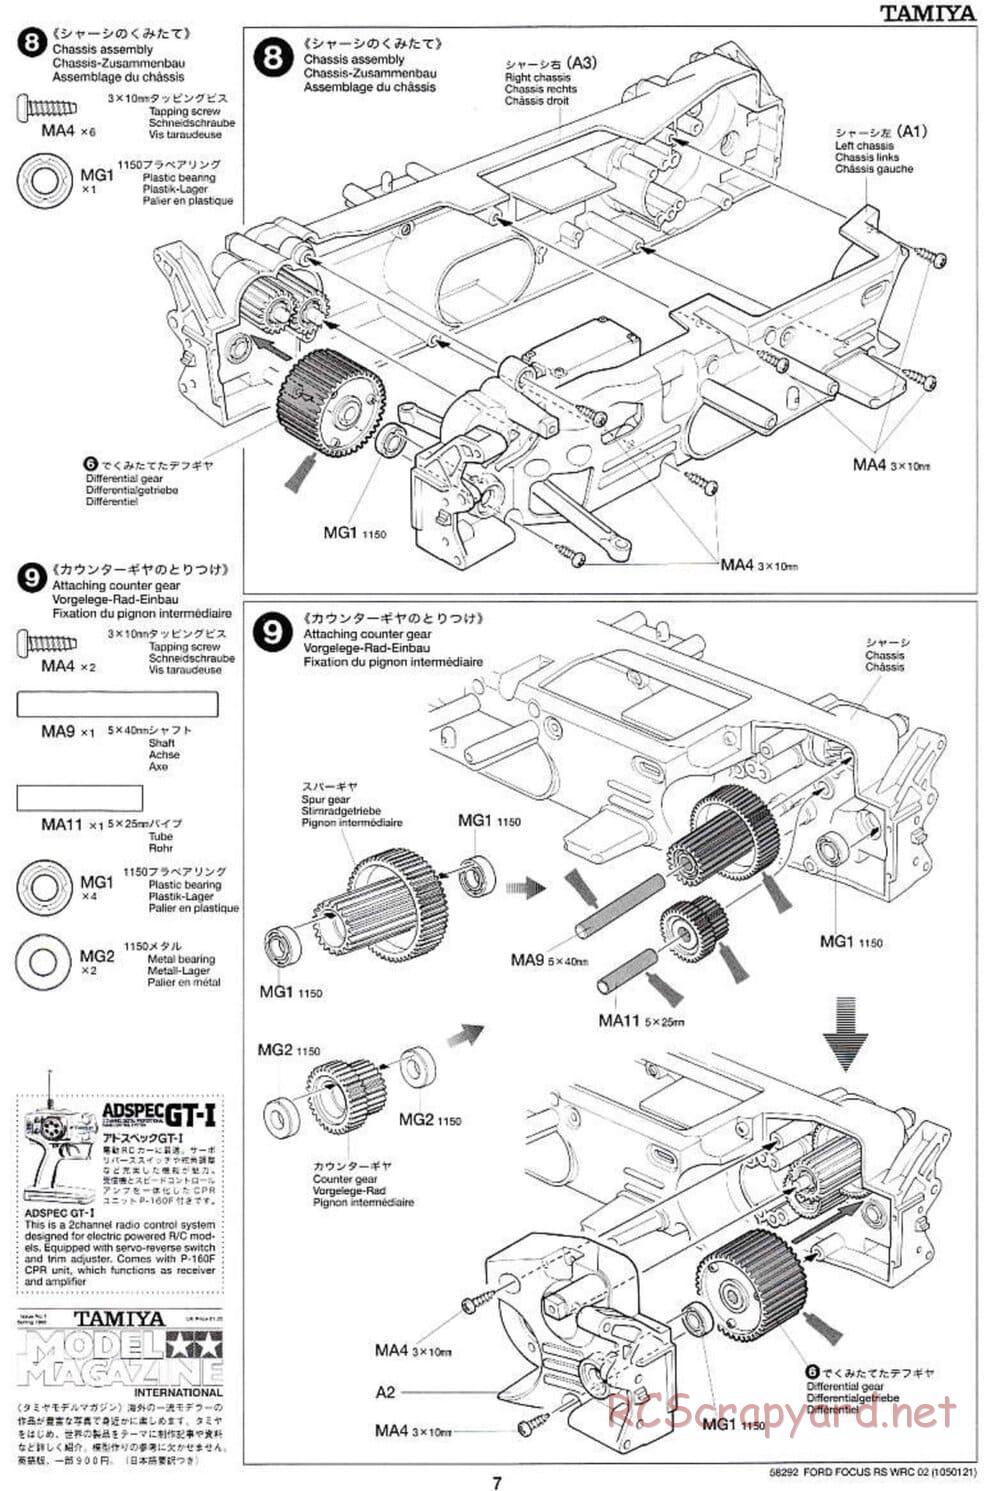 Tamiya - Ford Focus RS WRC 02 - TL-01 Chassis - Manual - Page 7